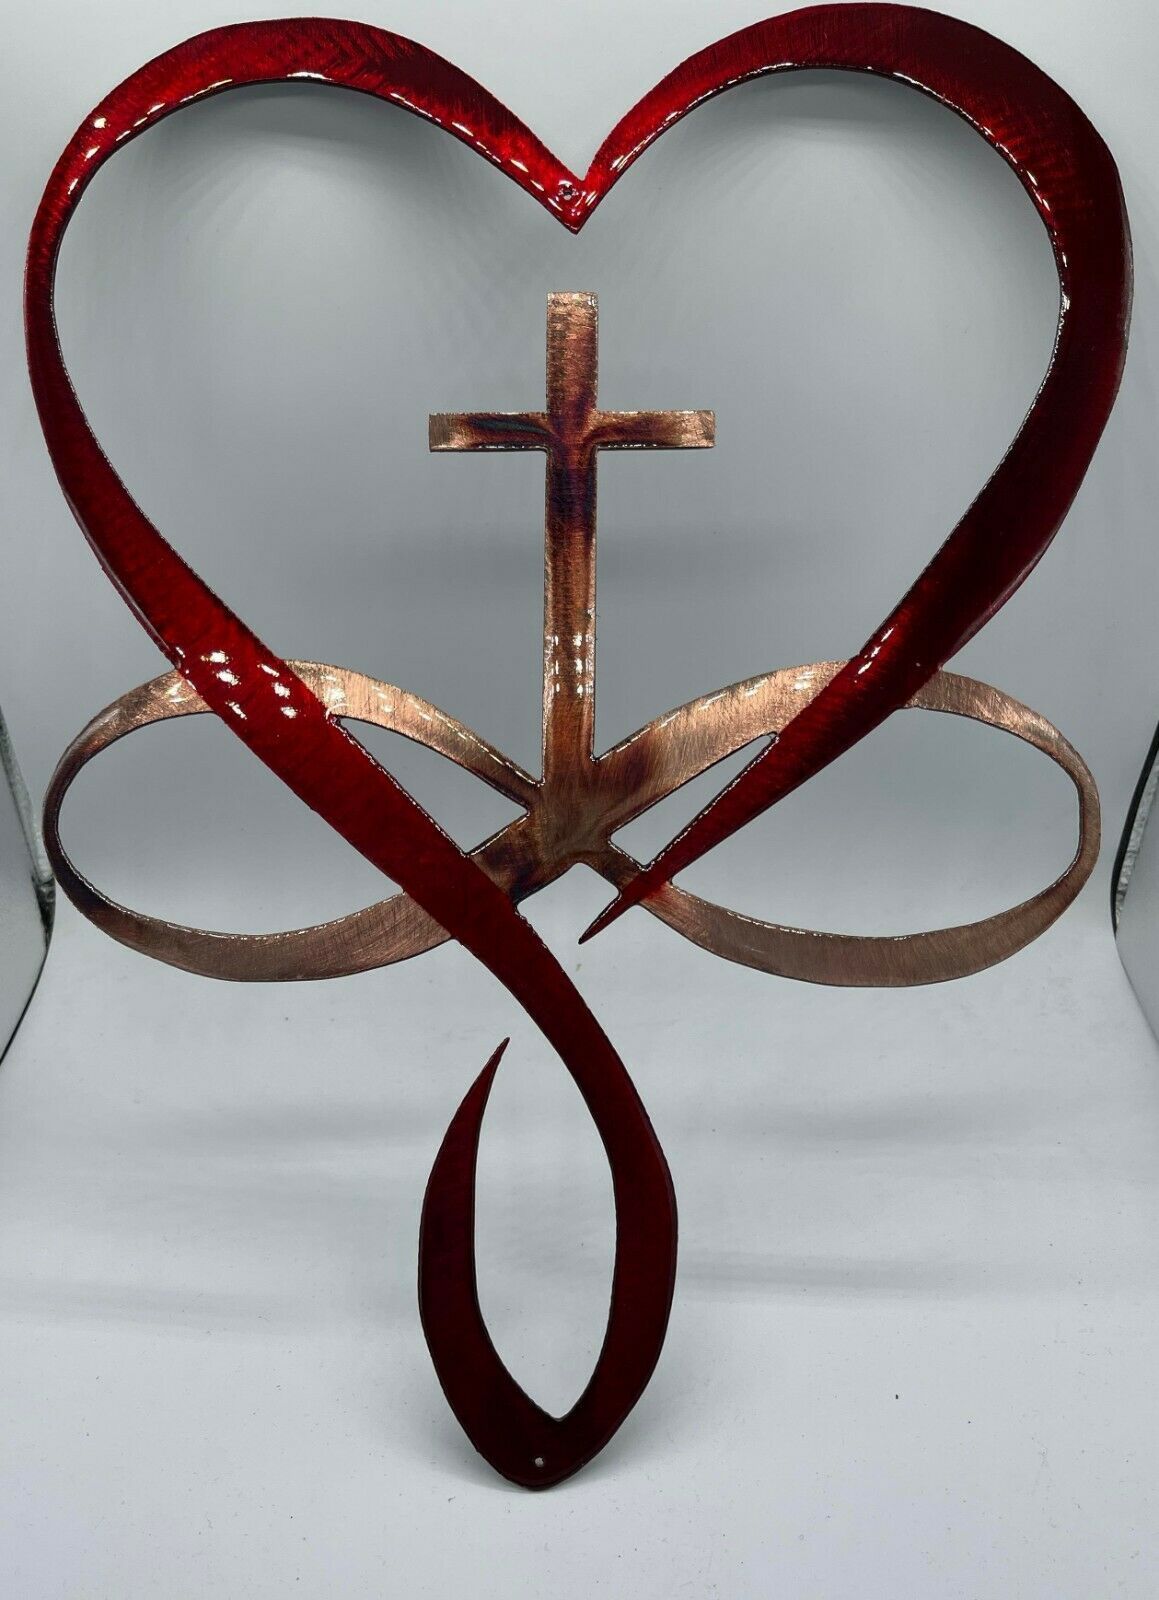 Primary image for Heart Cross Infinity Symbol Metal Wall Art 2 Toned  Red Heart 15" x 11 1/2"